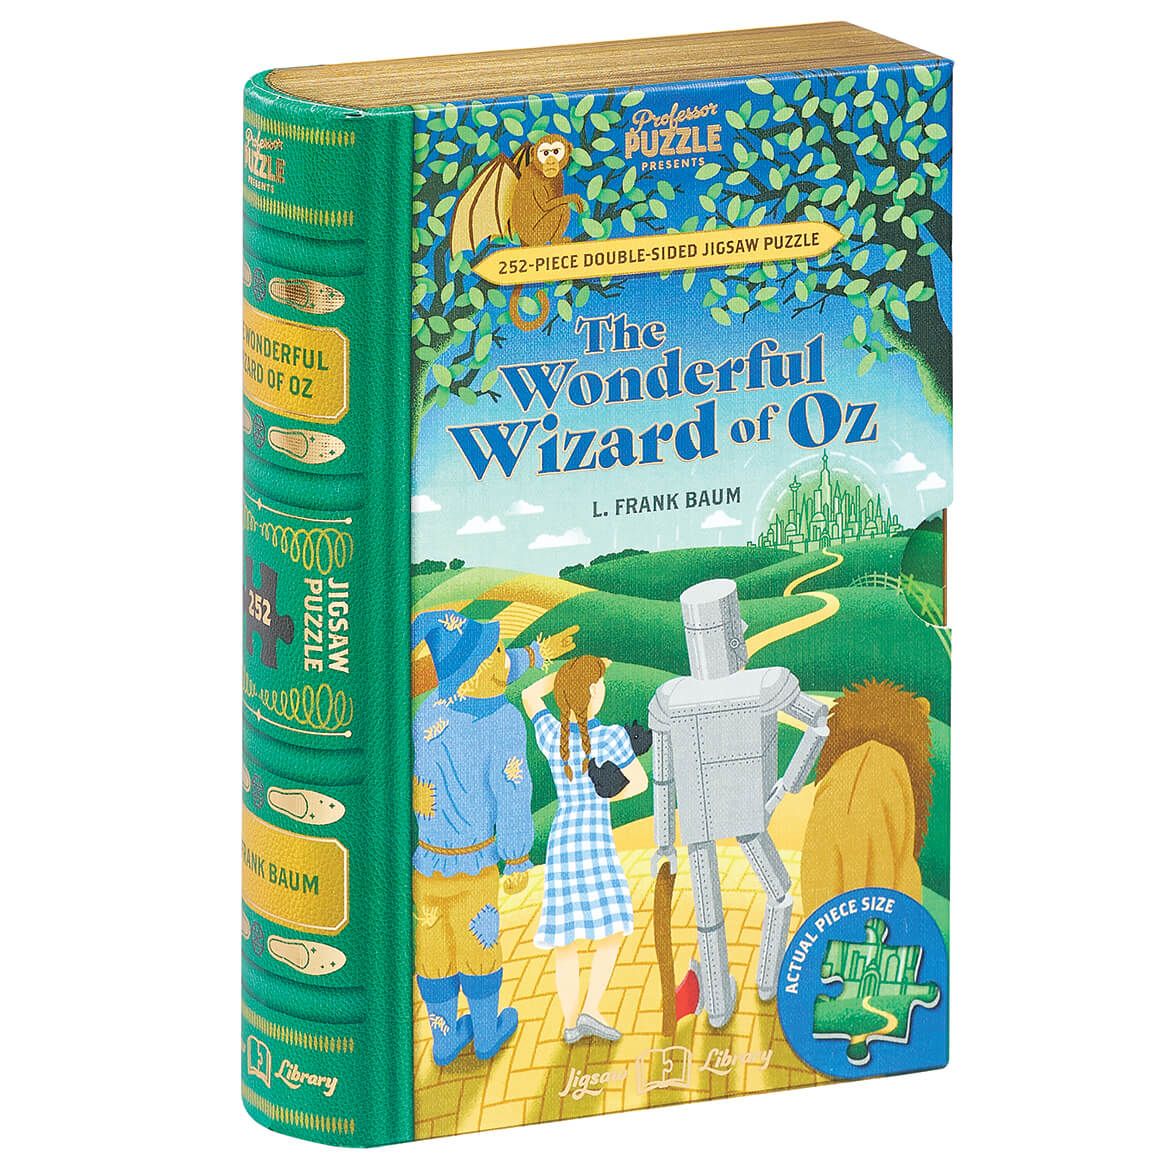 Jigsaw Library "The Wonderful Wizard of Oz" 2-Sided Puzzle + '-' + 372661